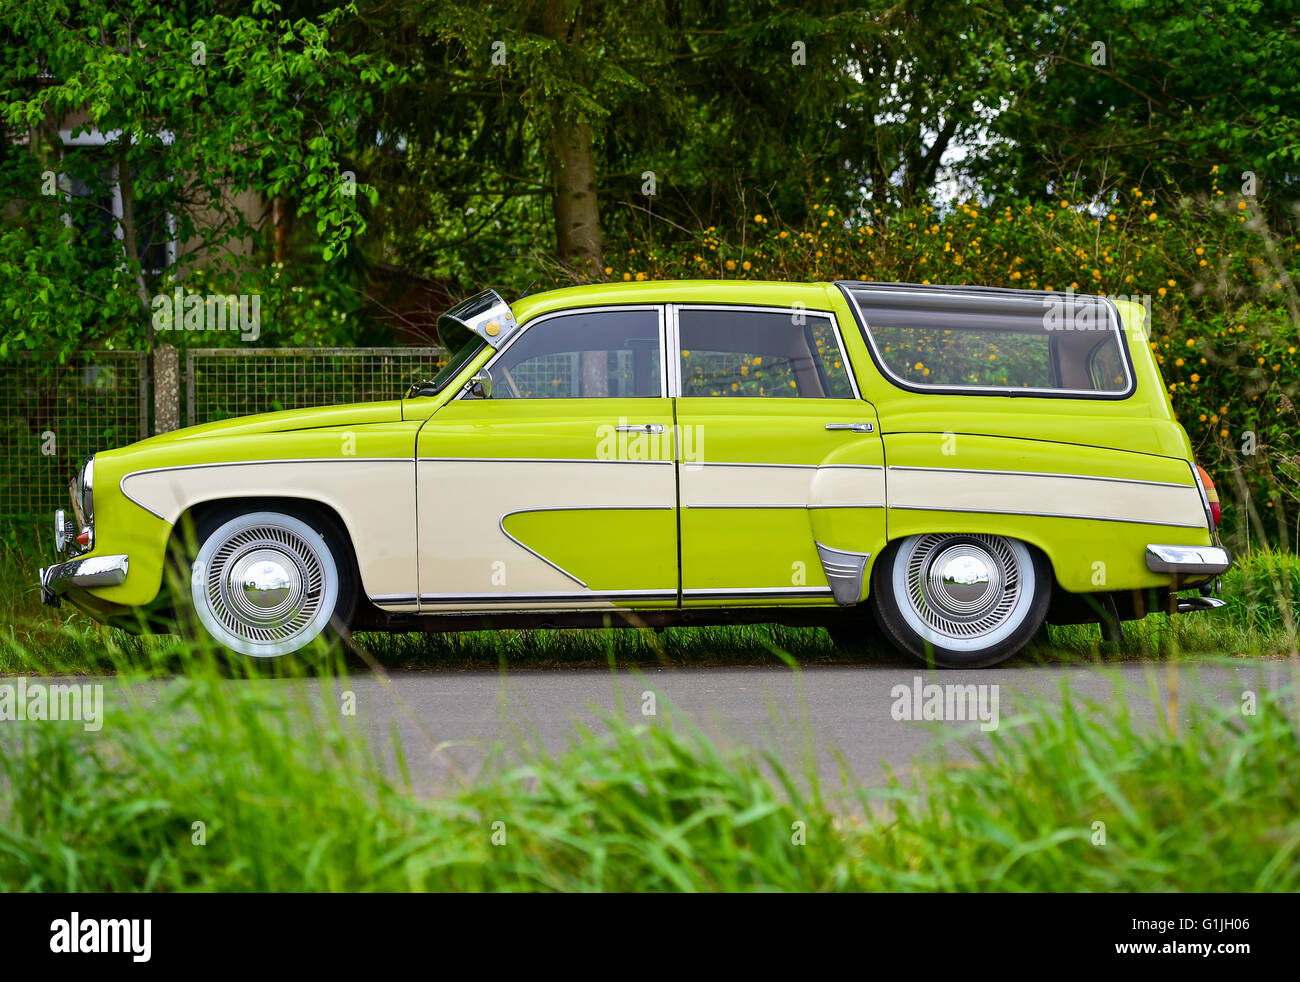 Wilhelmsaue, Germany. 16th May, 2016. A Wartburg 311 car from 1961 pictured in Wilhelmsaue, Germany, 16 May 2016. The Wartburg 311 was manufacturered by the former Eisenach car manufacturing plant of the German Democratic Republic (GDR) from 1955 to 1965. Photo: PATRICK PLEUL/dpa/Alamy Live News Stock Photo